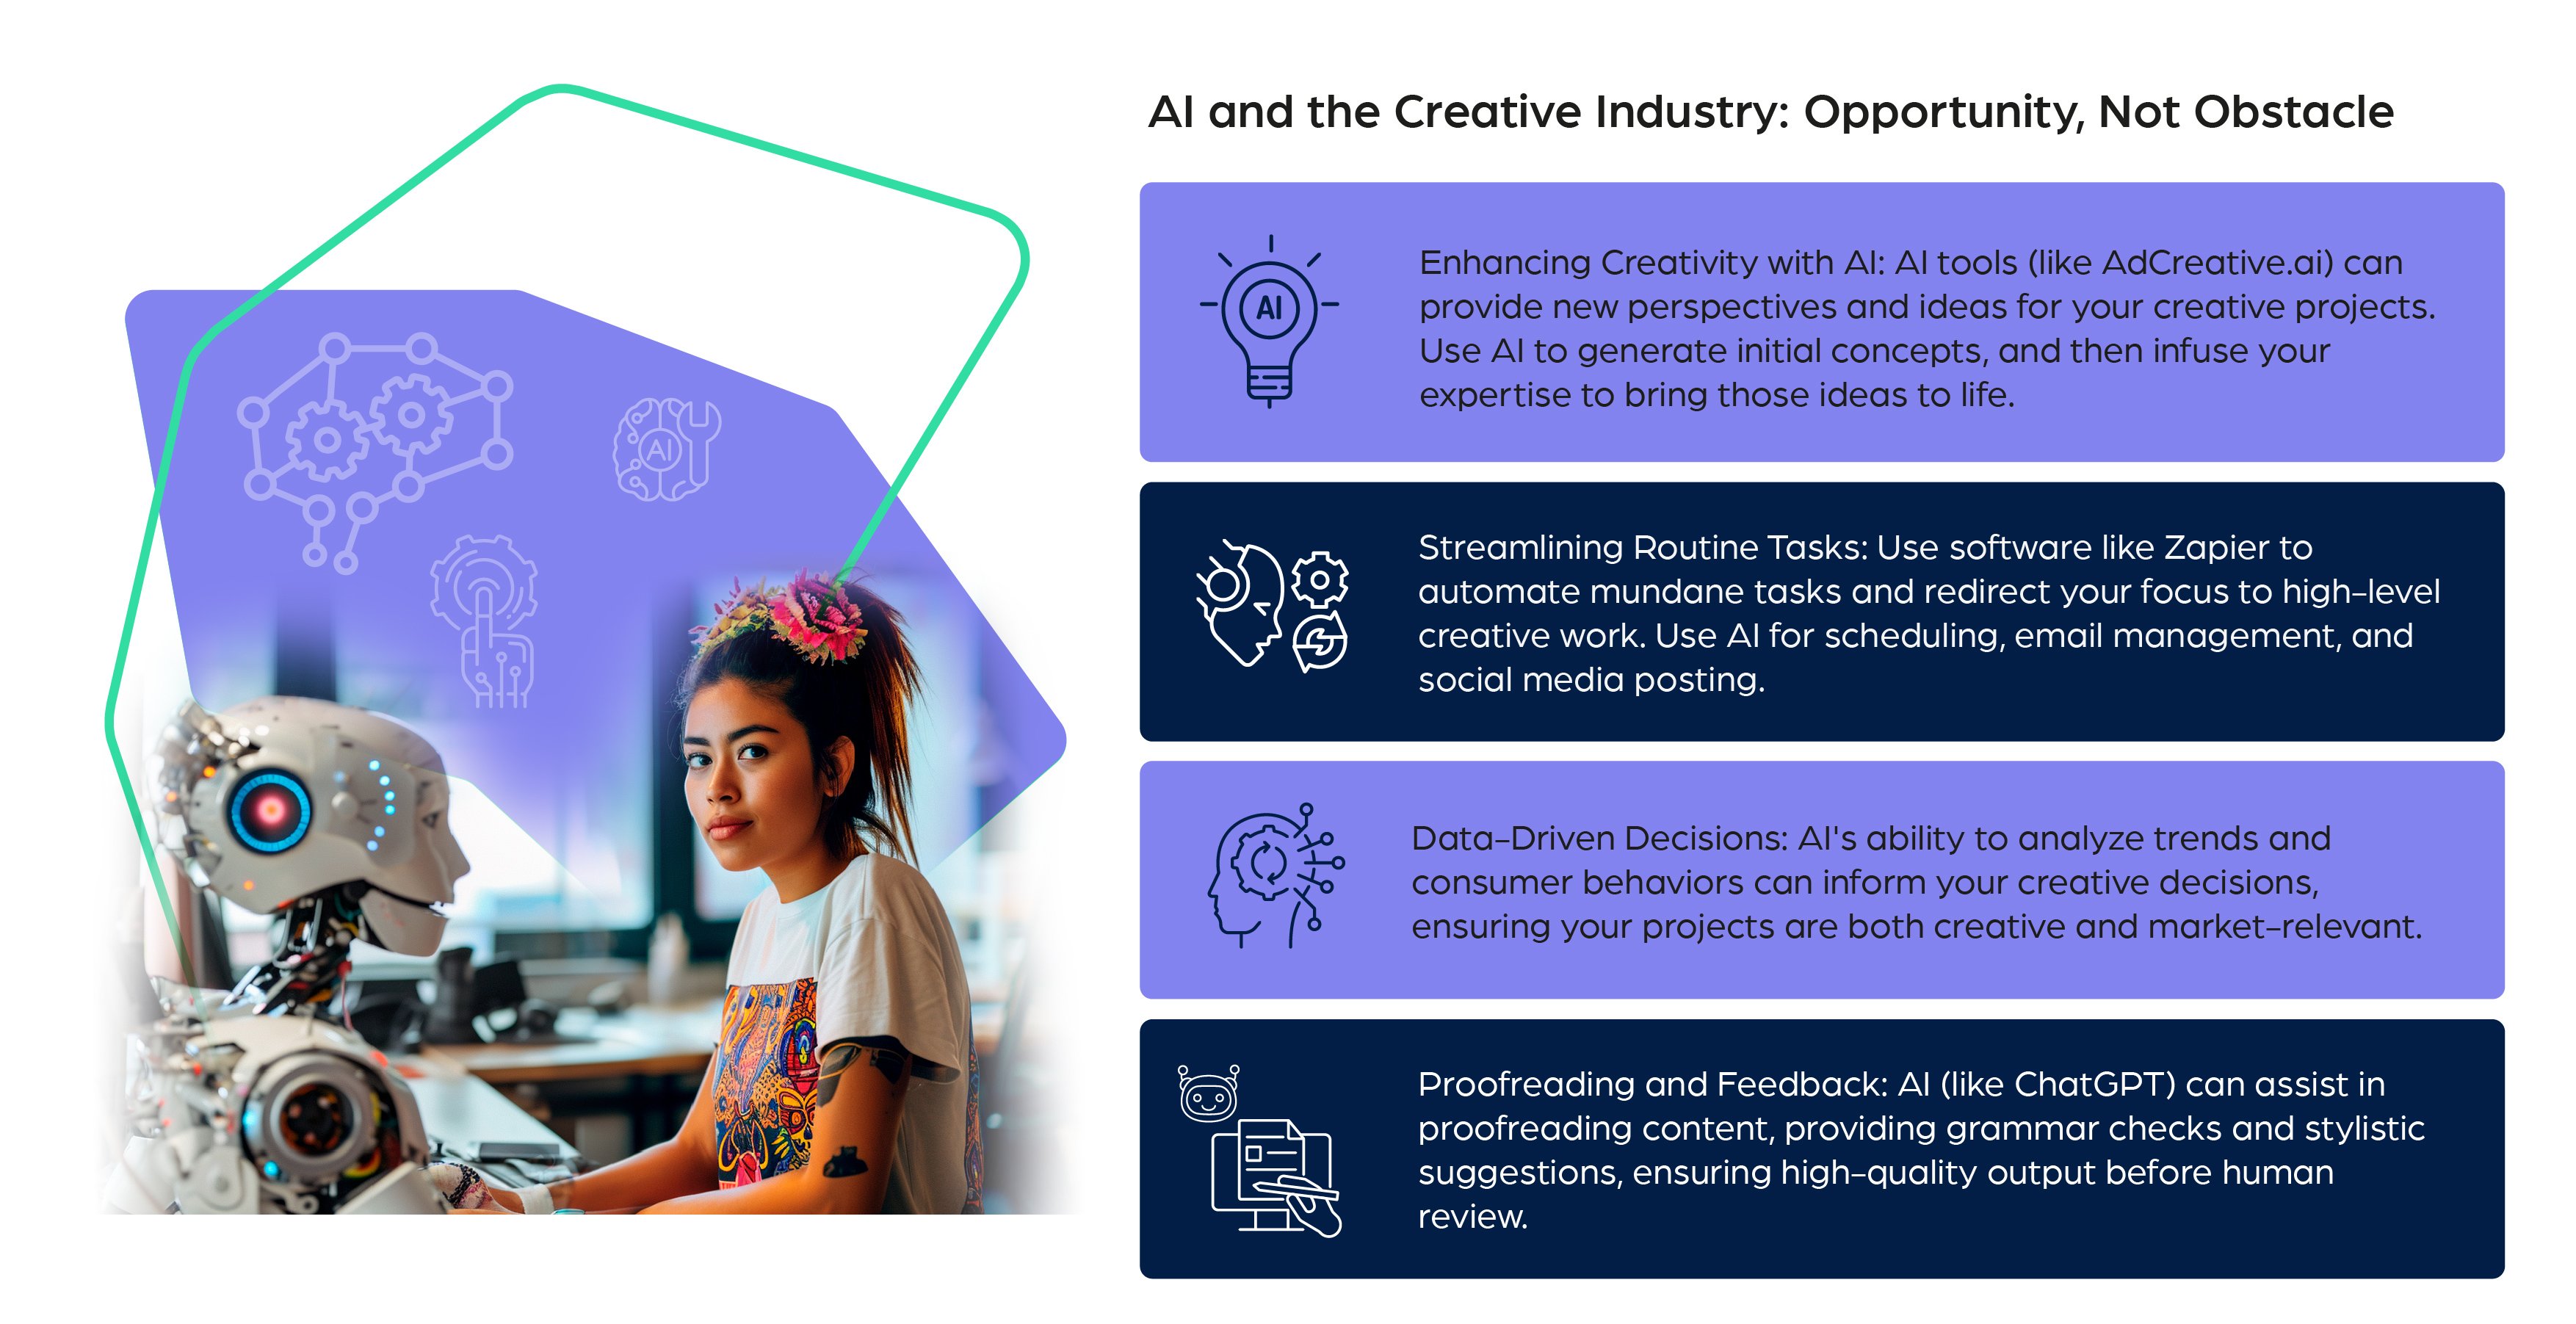 AI and the Creative Industry: Opportunity, Not Obstacle